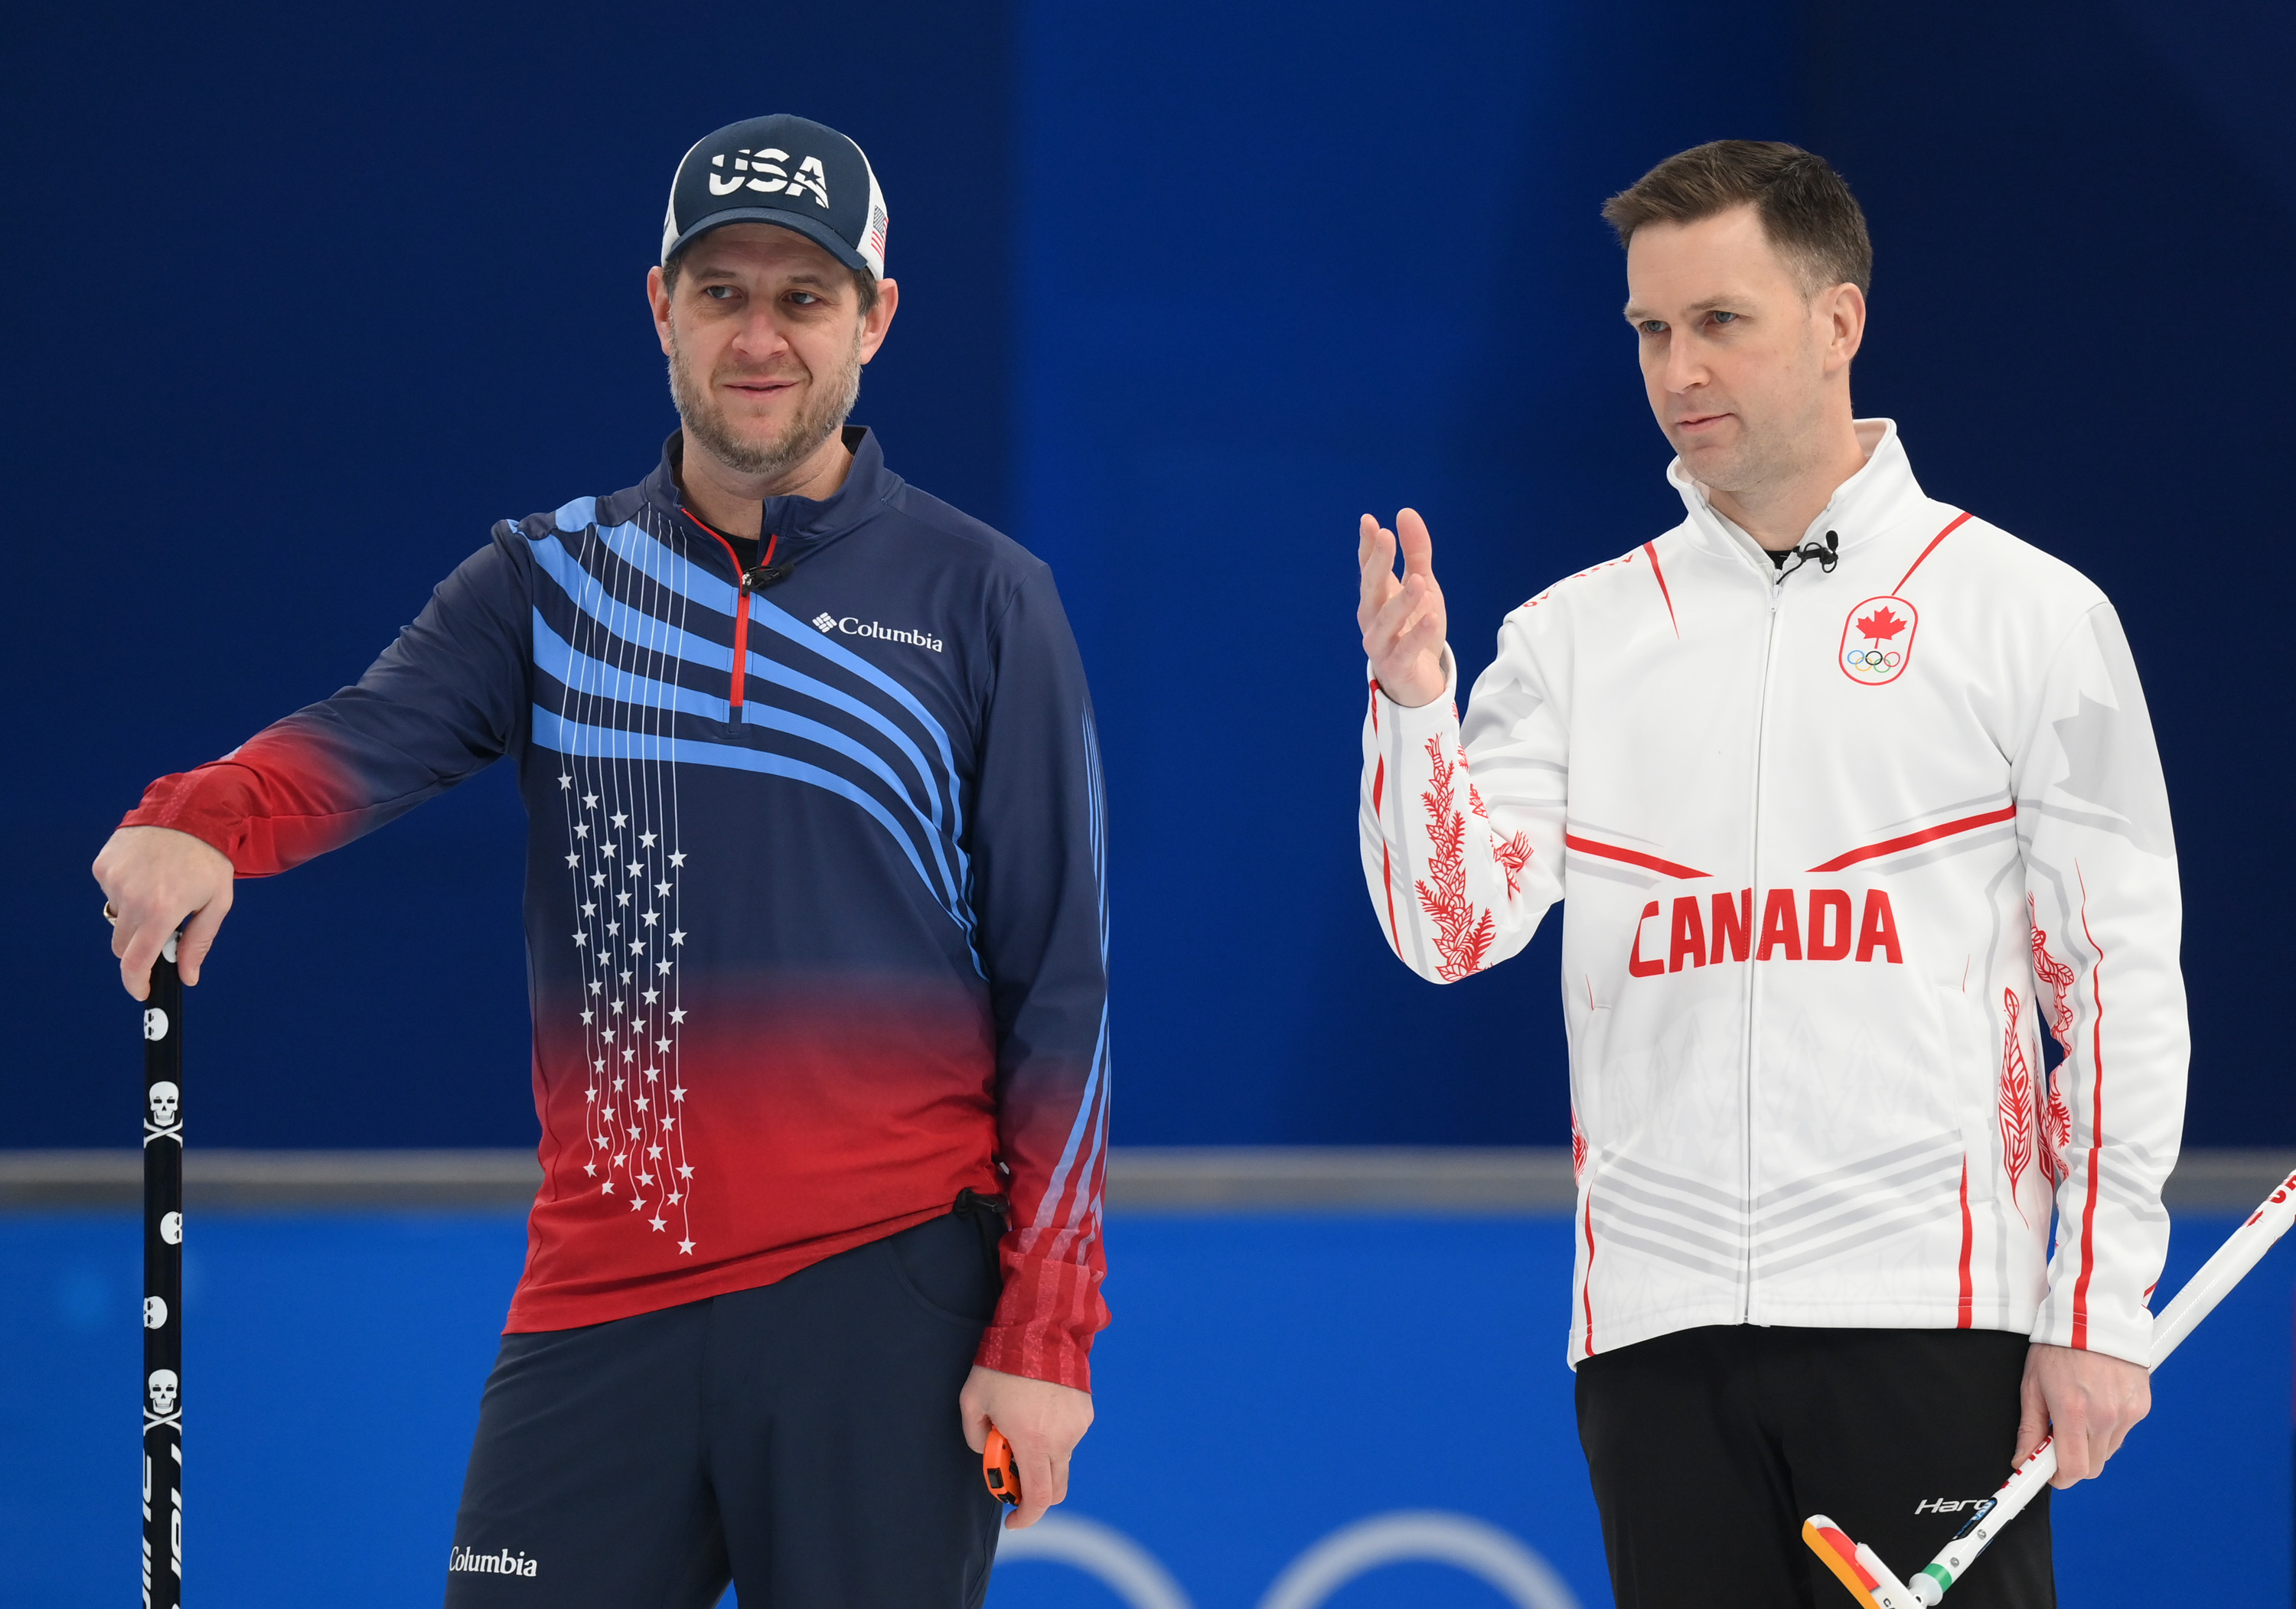 Team Usa Concedes To Canada With A Score Of 10 5 In Men S Curling Nbc Chicago